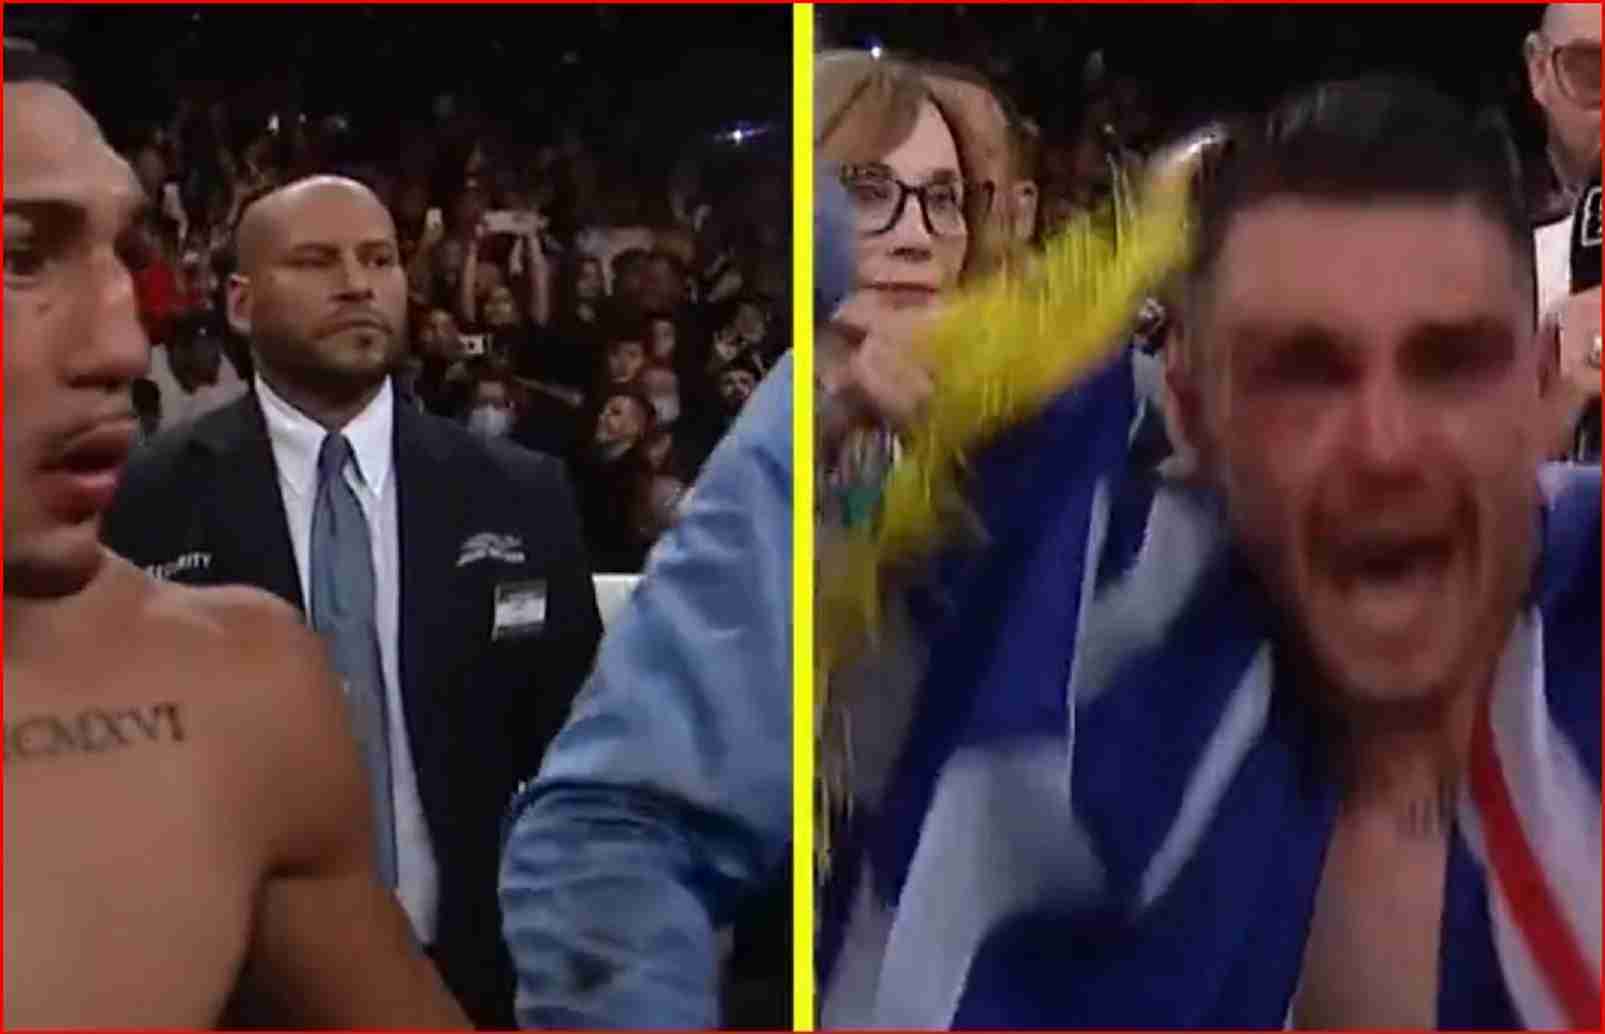 Watch: Brutal Humanity Of Boxing Illustrated In Heartbreaking Moment